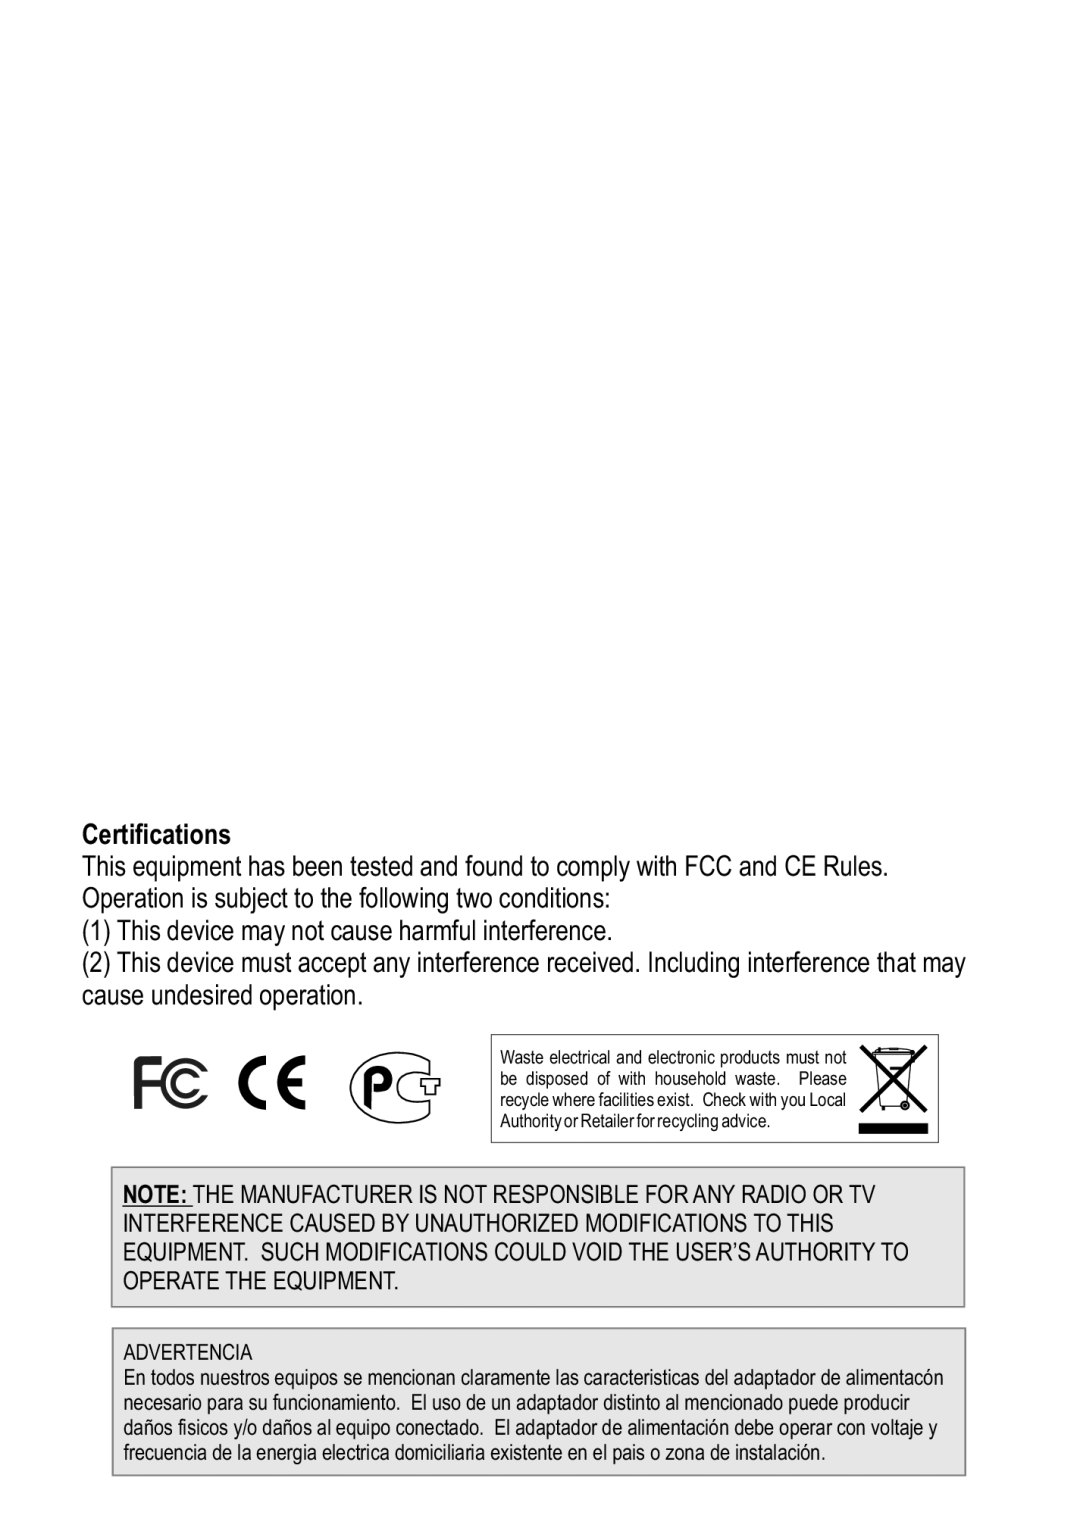 TRENDnet TK1603R manual This device may not cause harmful interference 